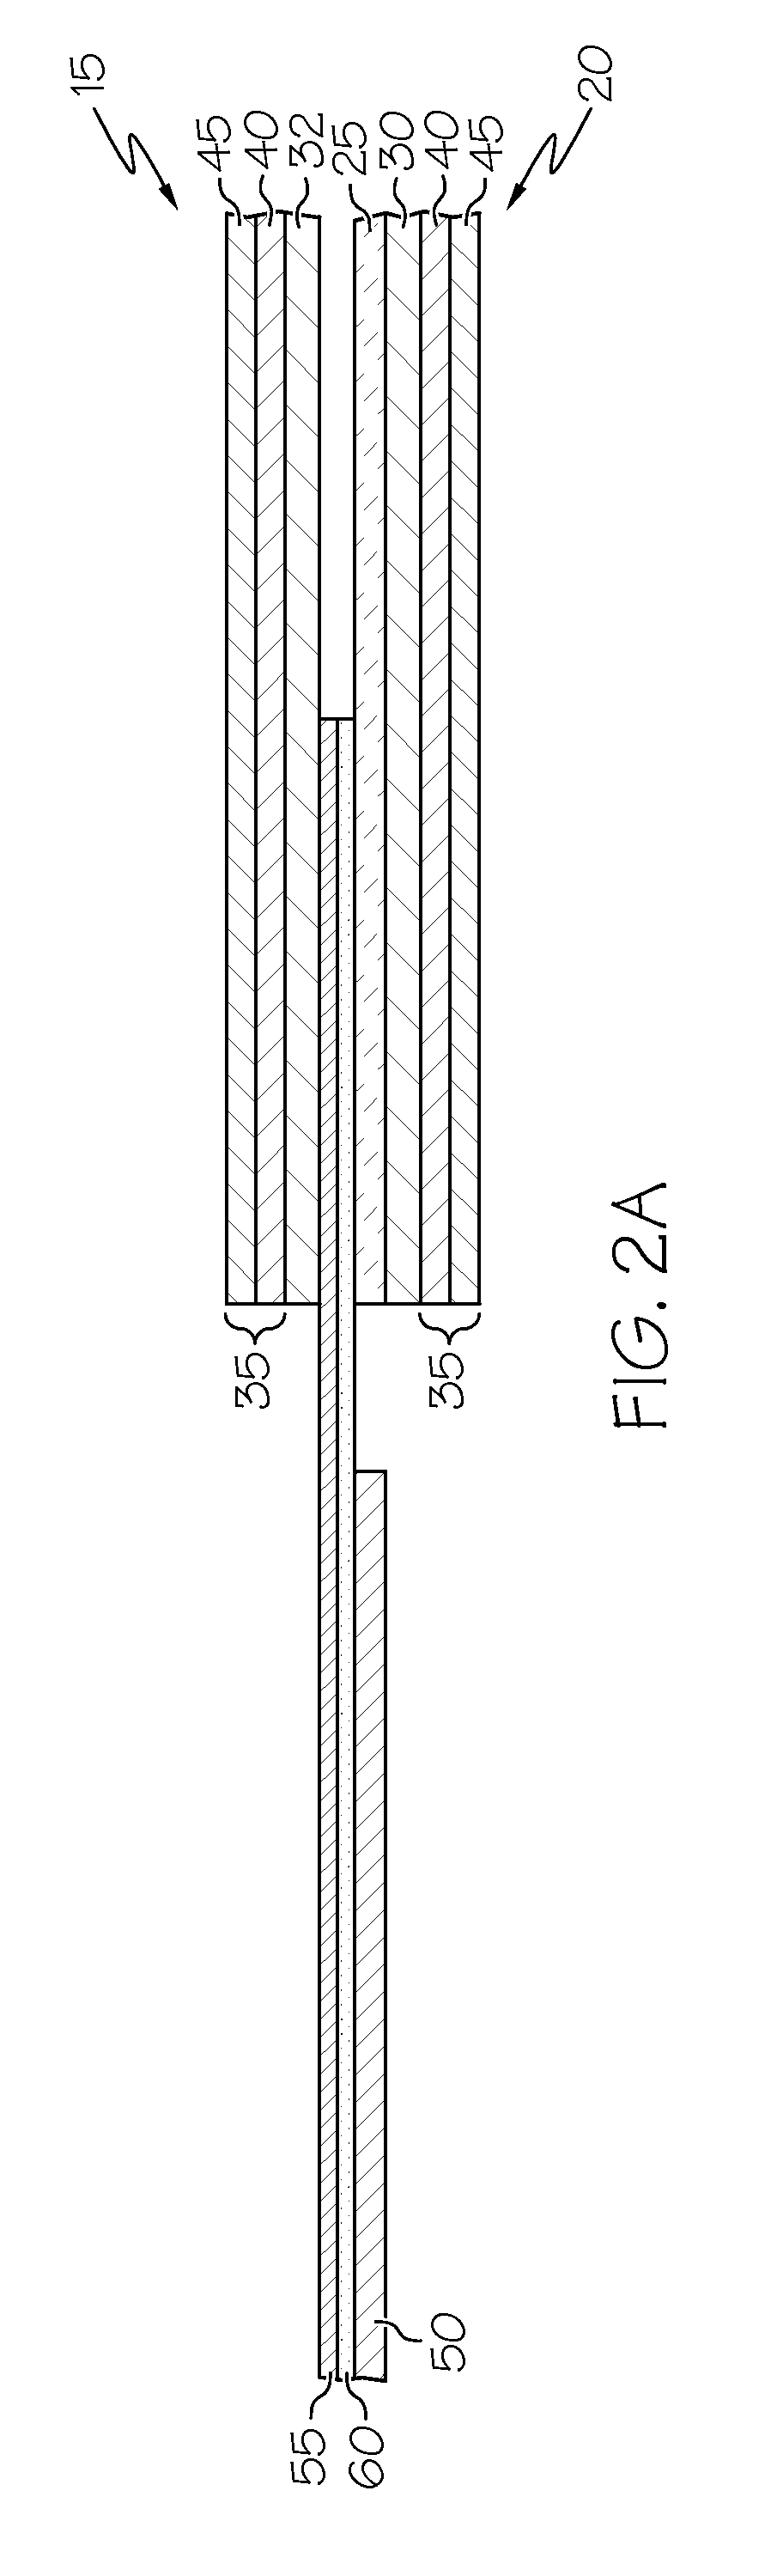 Integrated fuel cell assembly and method of making